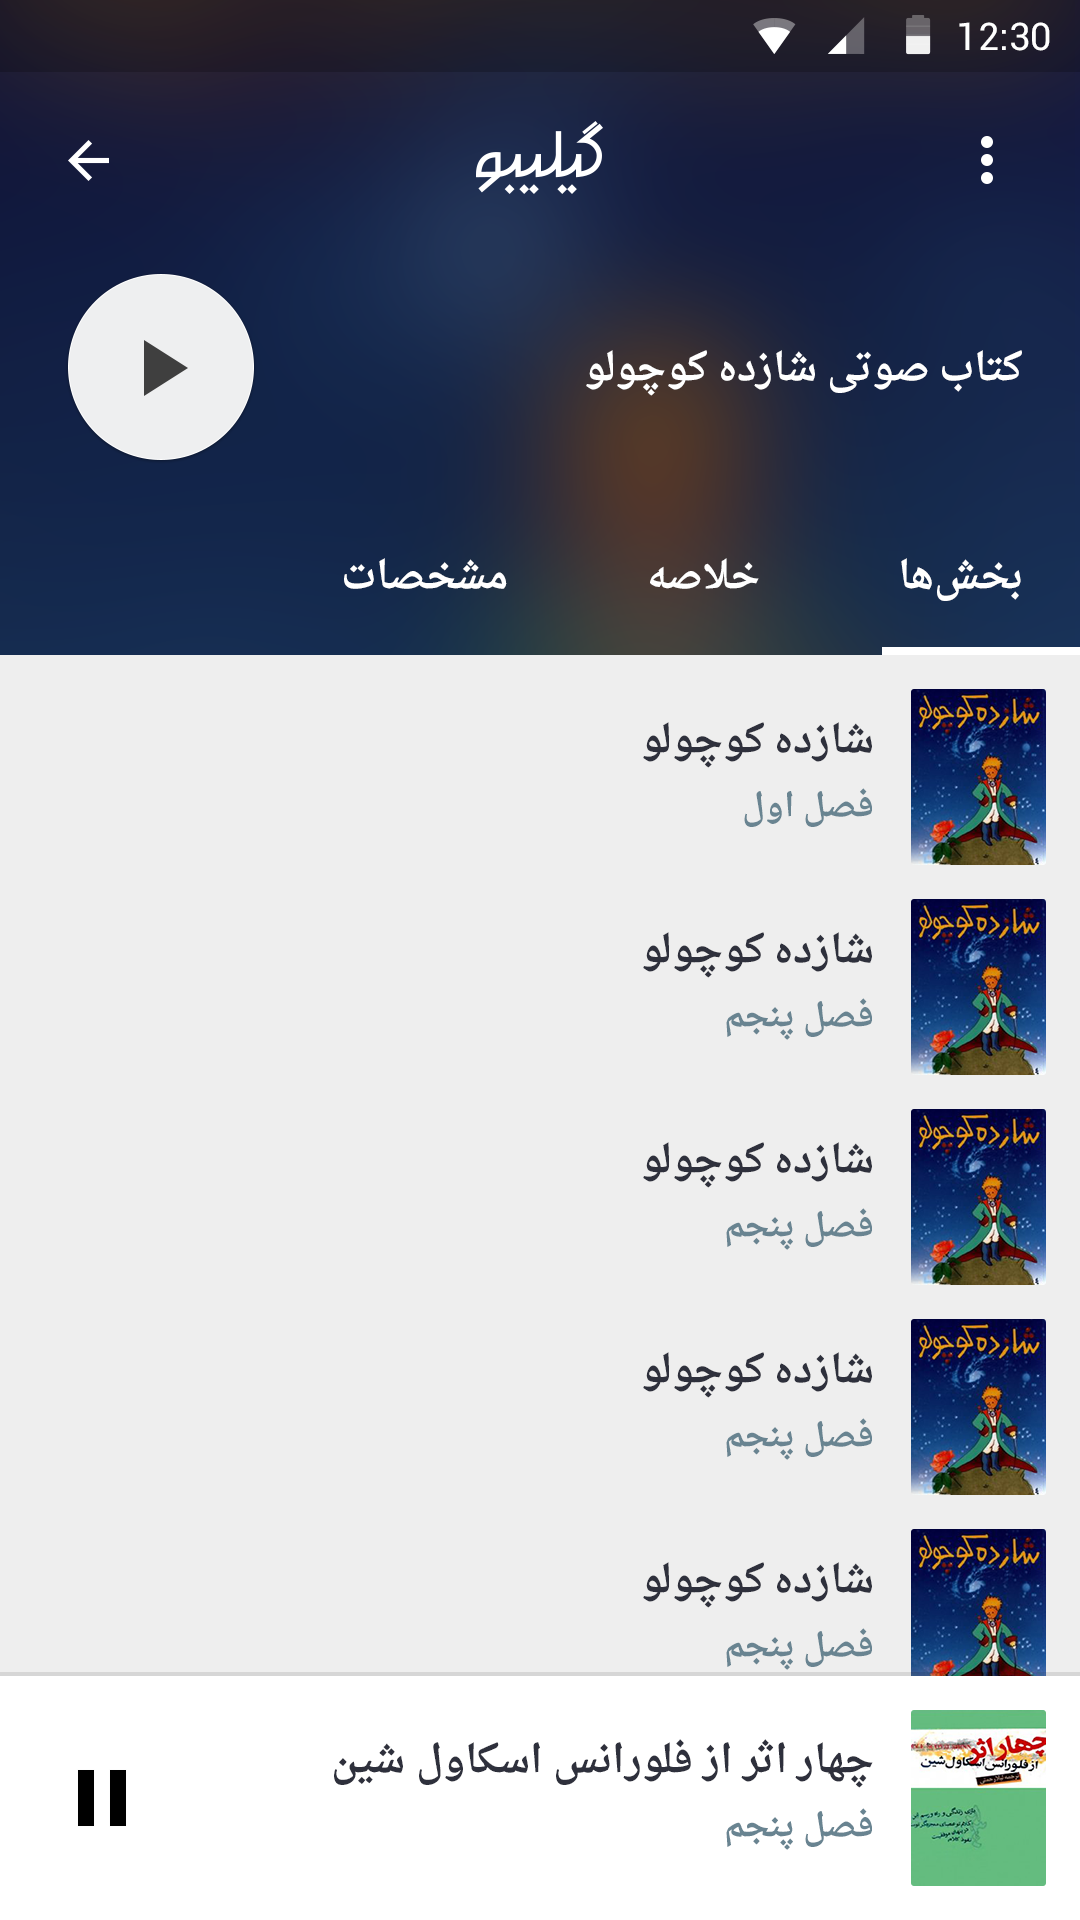 Gilibo for Android by Pouya Saadeghi - /projects/4kJ79cQ7bK163PAAqcvQZE1tfbbezLBY.png